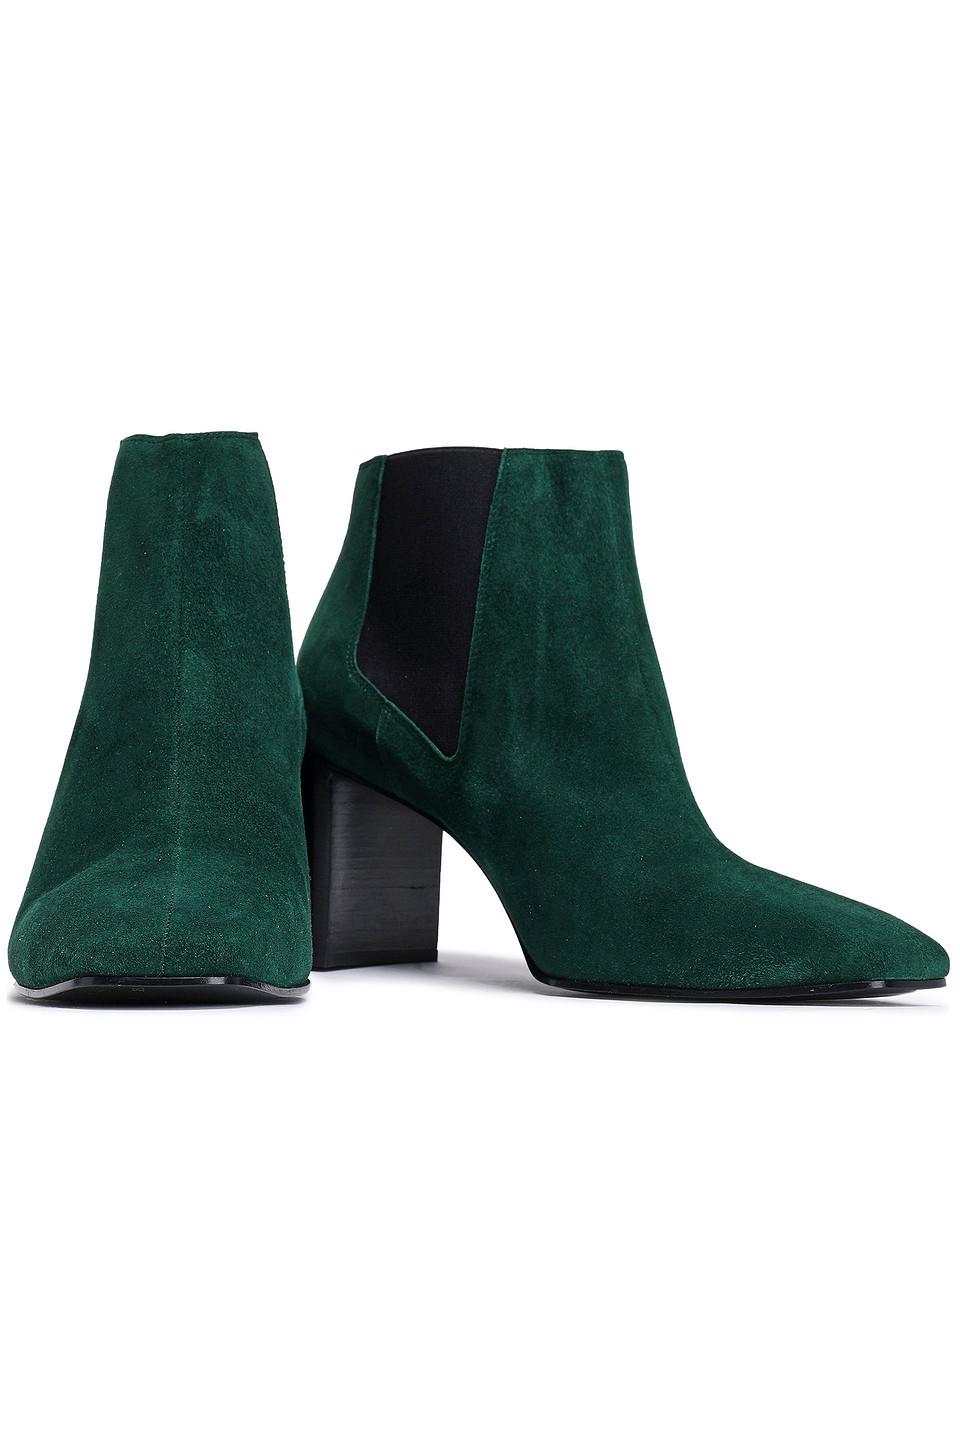 Rag & Bone Suede Ankle Boots Emerald in Green | Lyst